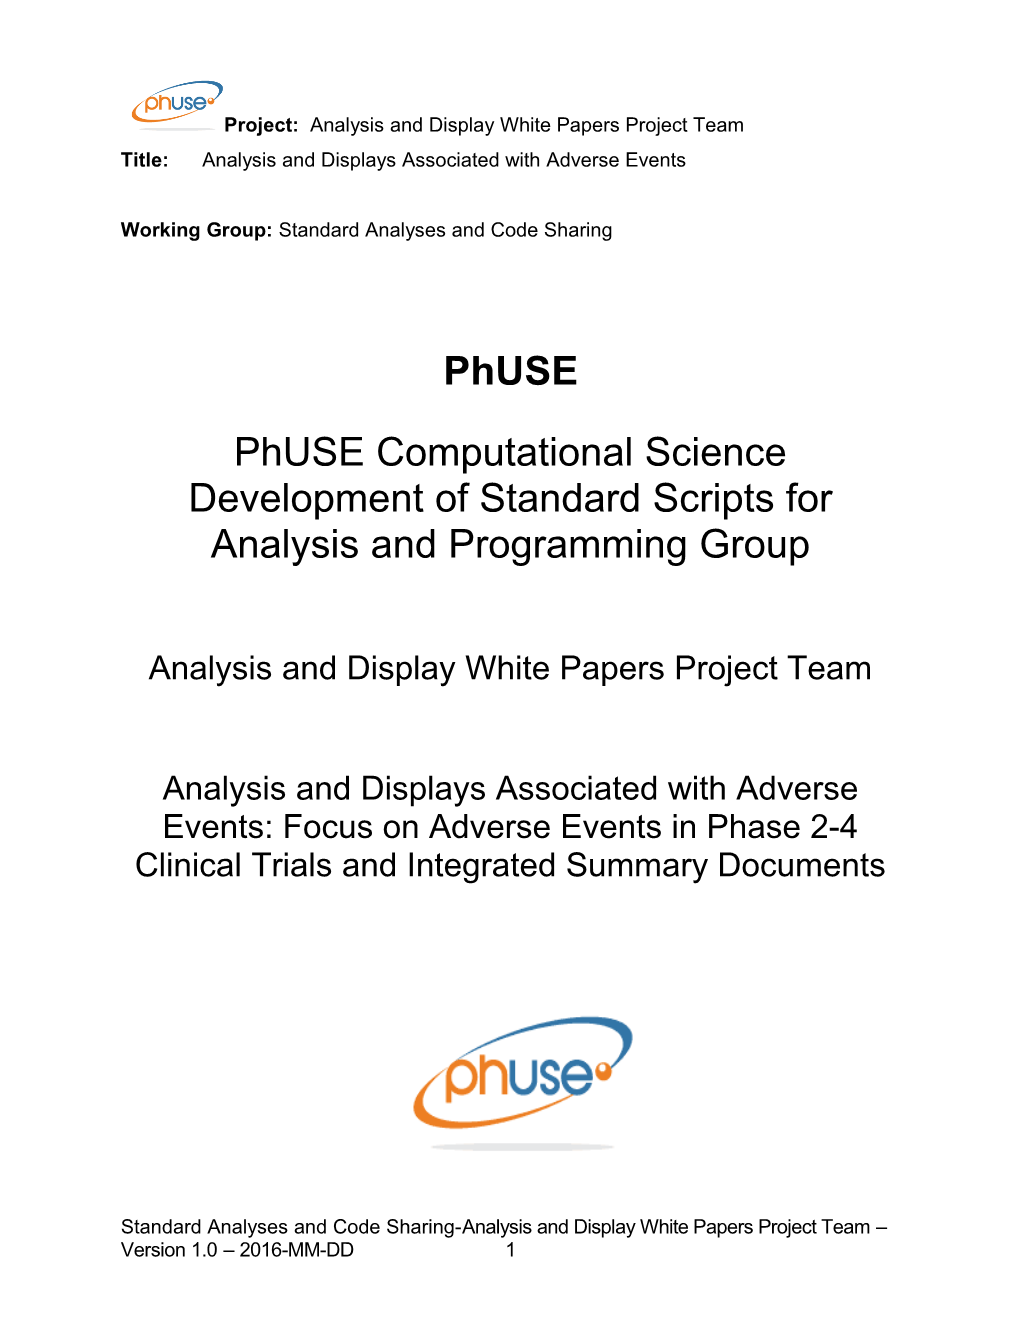 Phuse Computational Science Development of Standard Scripts for Analysis and Programming Group